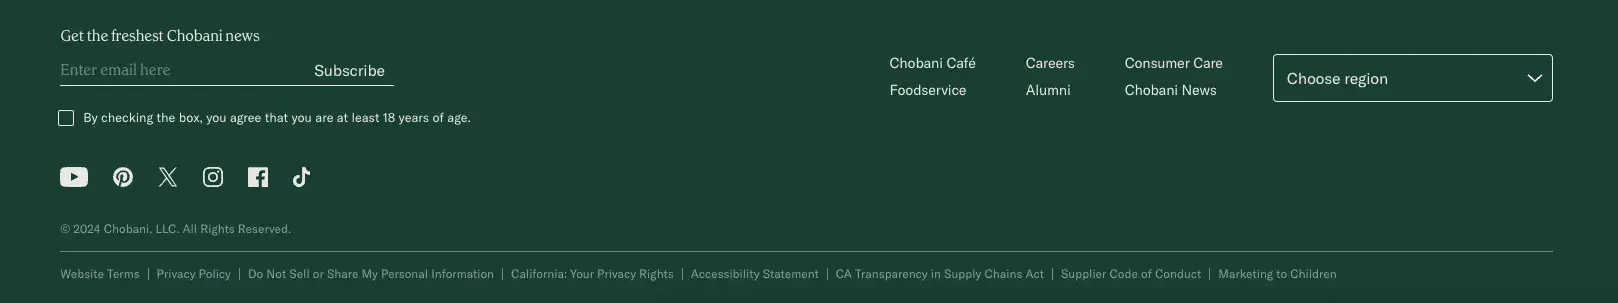 Website footer optimization example from chobani